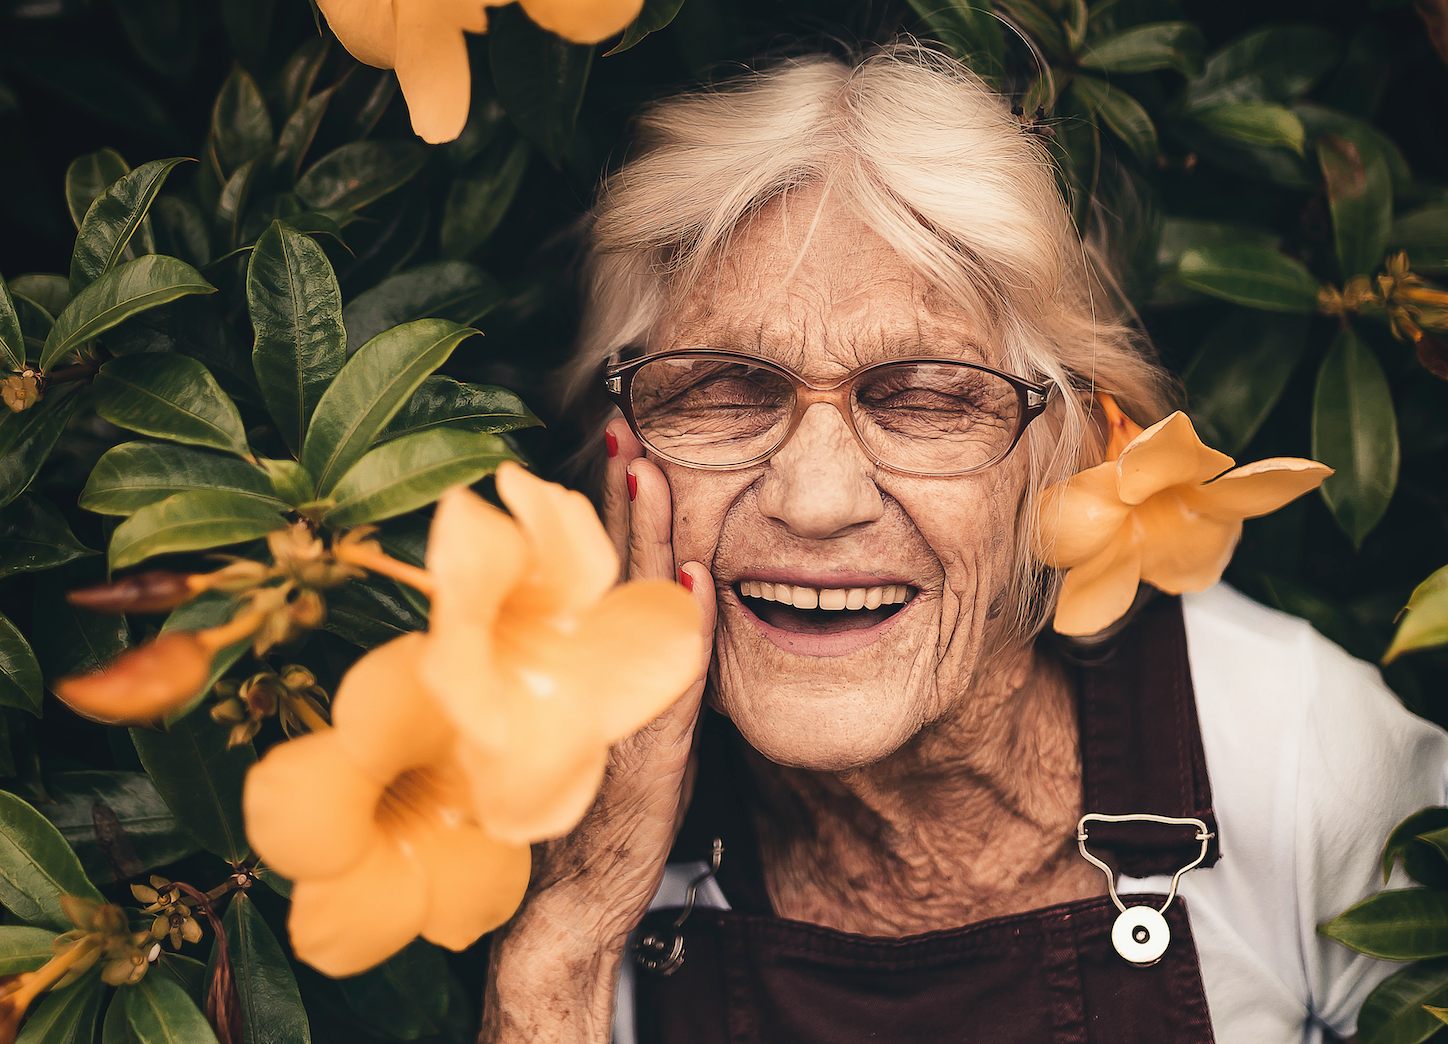 Laughing senior woman against golden trumpet vine is starting to feel pain-free after weeks of taking collagen for arthritis